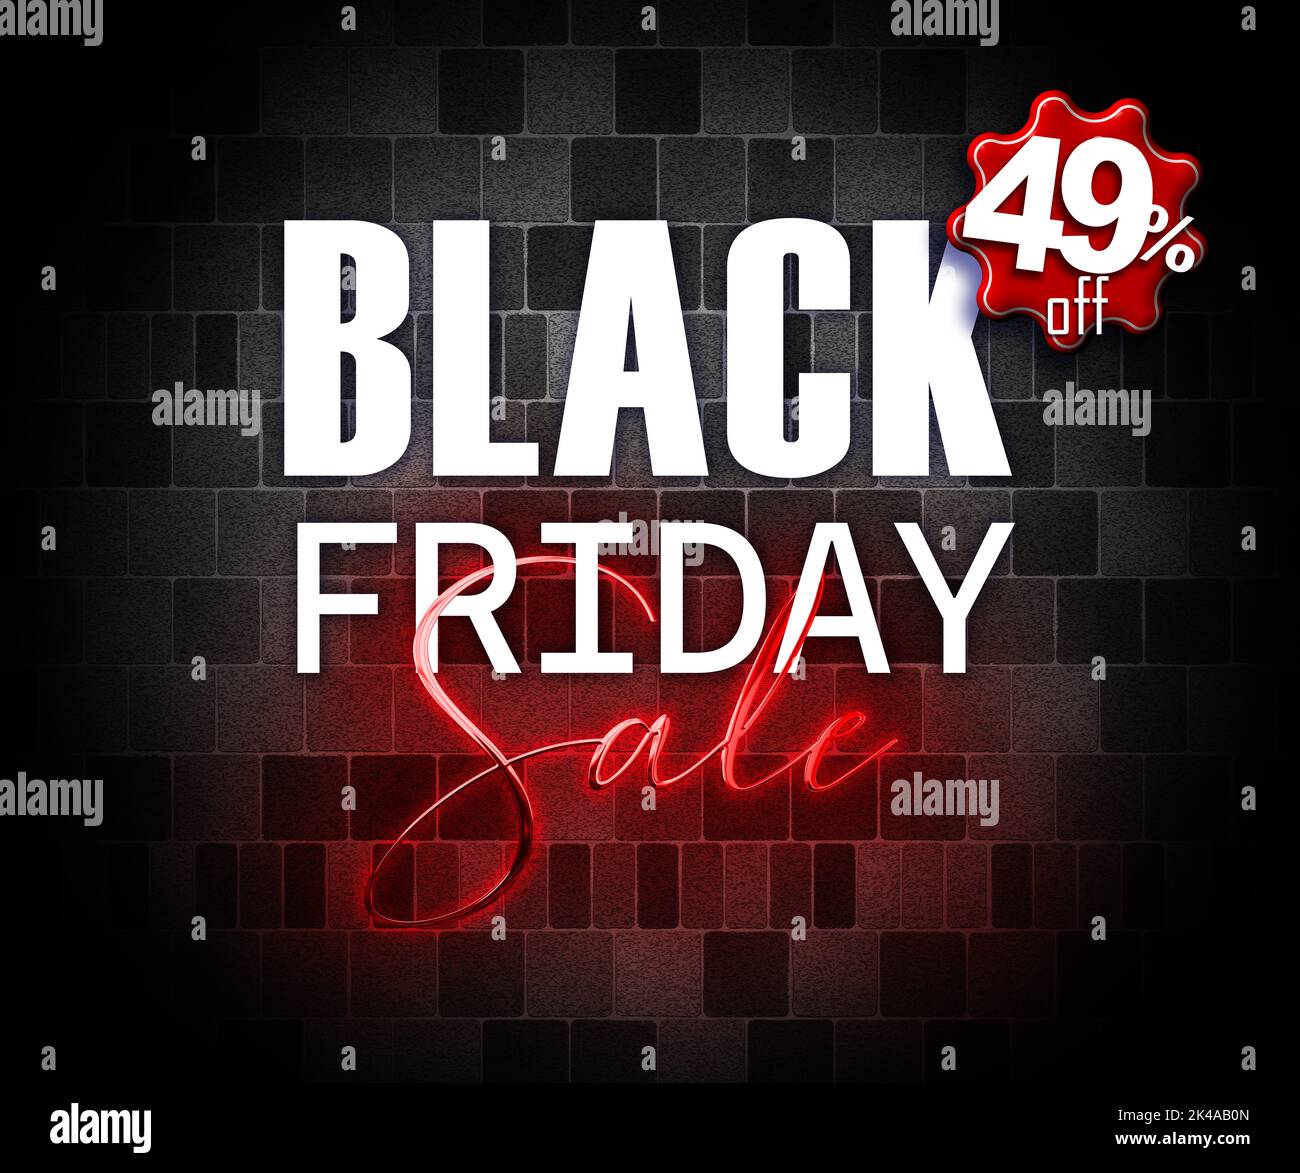 illustration with 3d elements black friday promotion banner 49 percent off sales increase Stock Photo